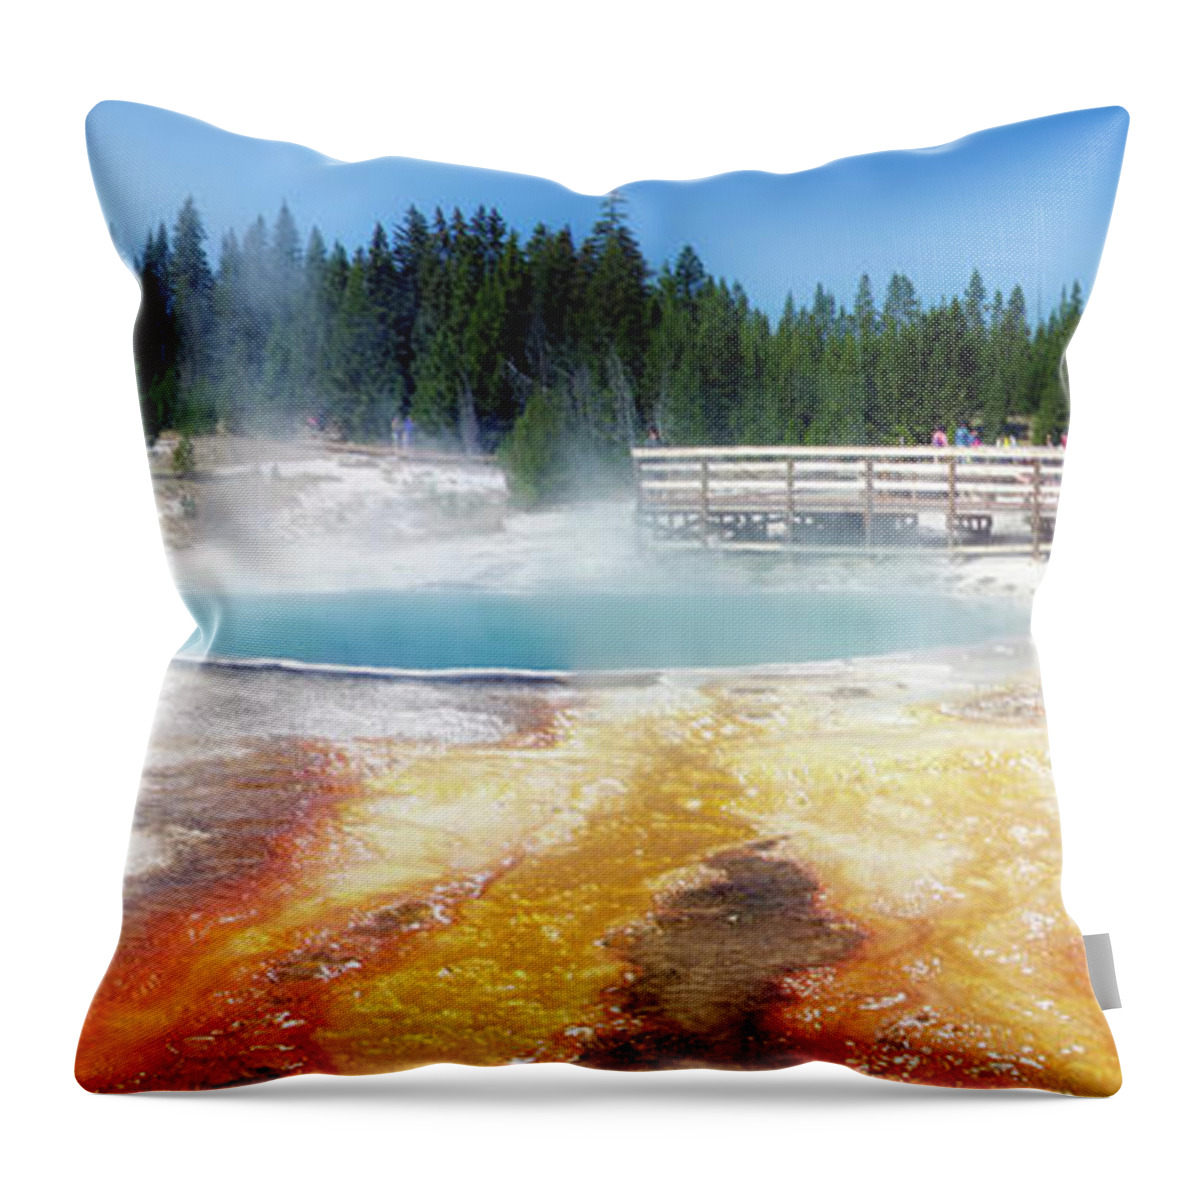 Yellowstone Park Black Pool Throw Pillow featuring the photograph Live Dream Own Yellowstone Park Black Pool Text by Thomas Woolworth